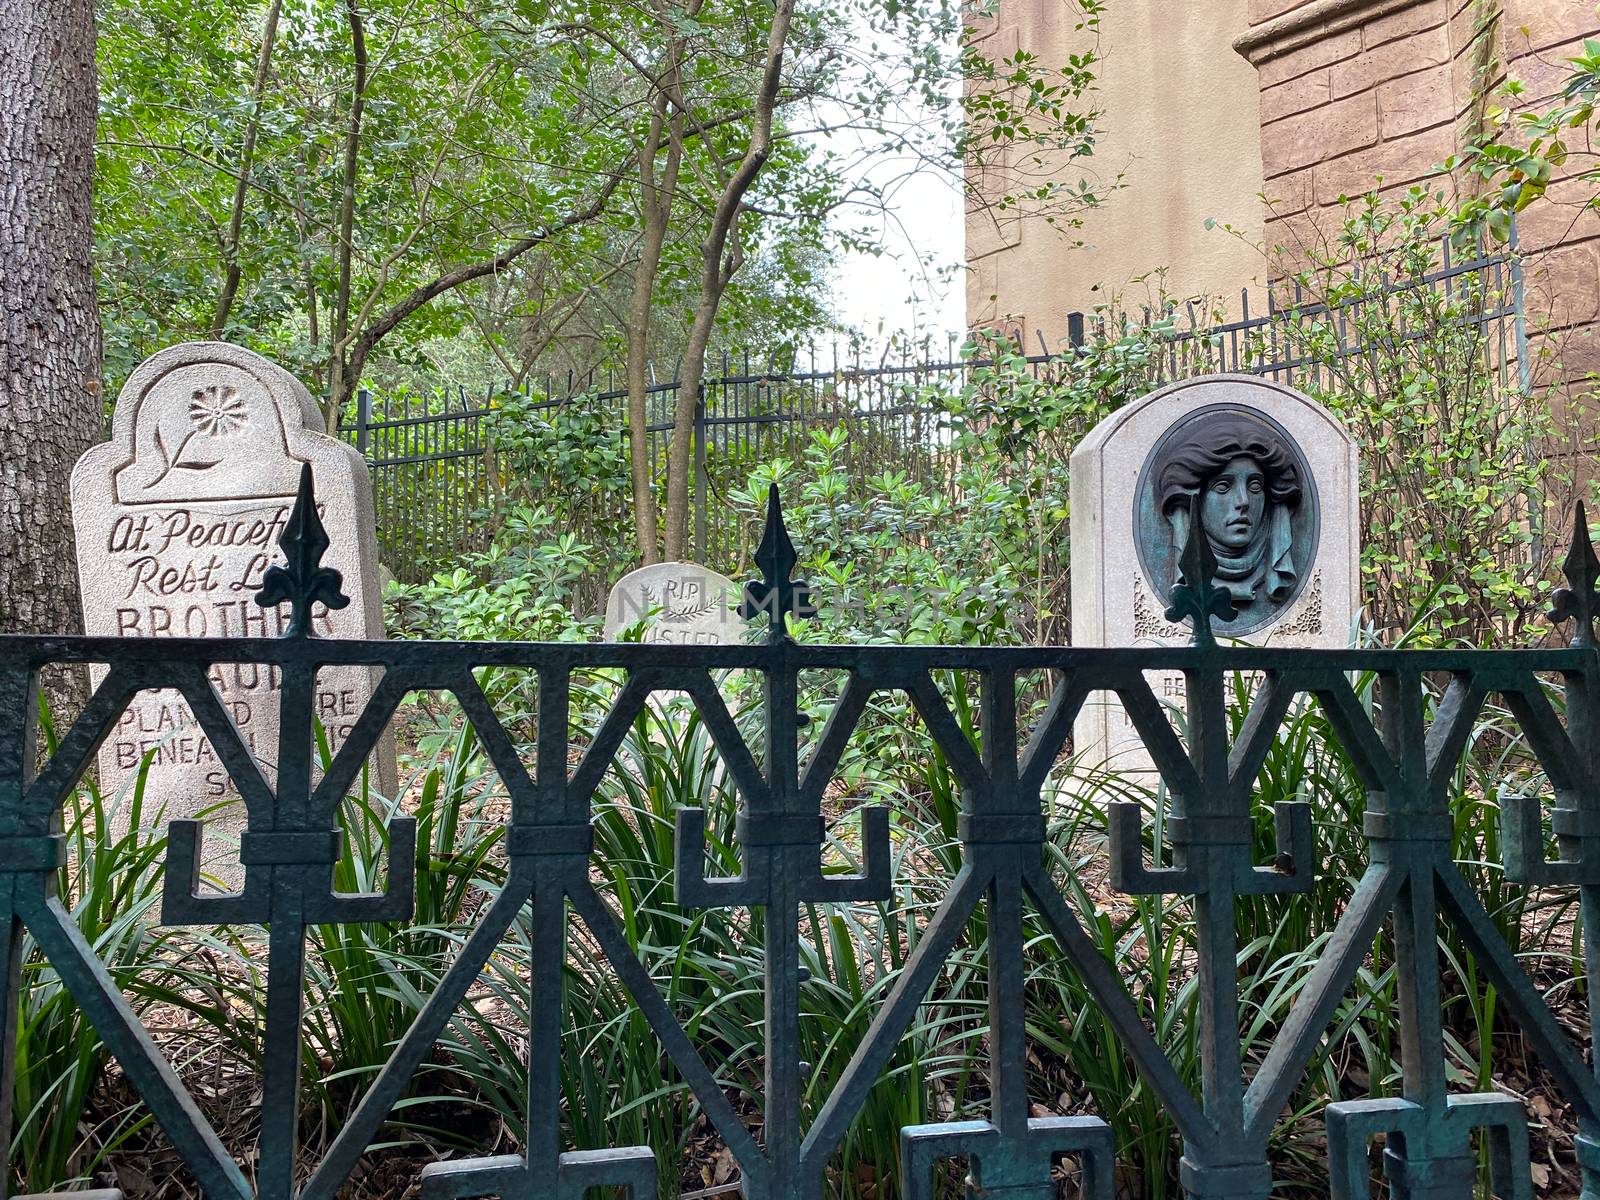 The grave markers outside of the Haunted Mansion ride in the Mag by Jshanebutt